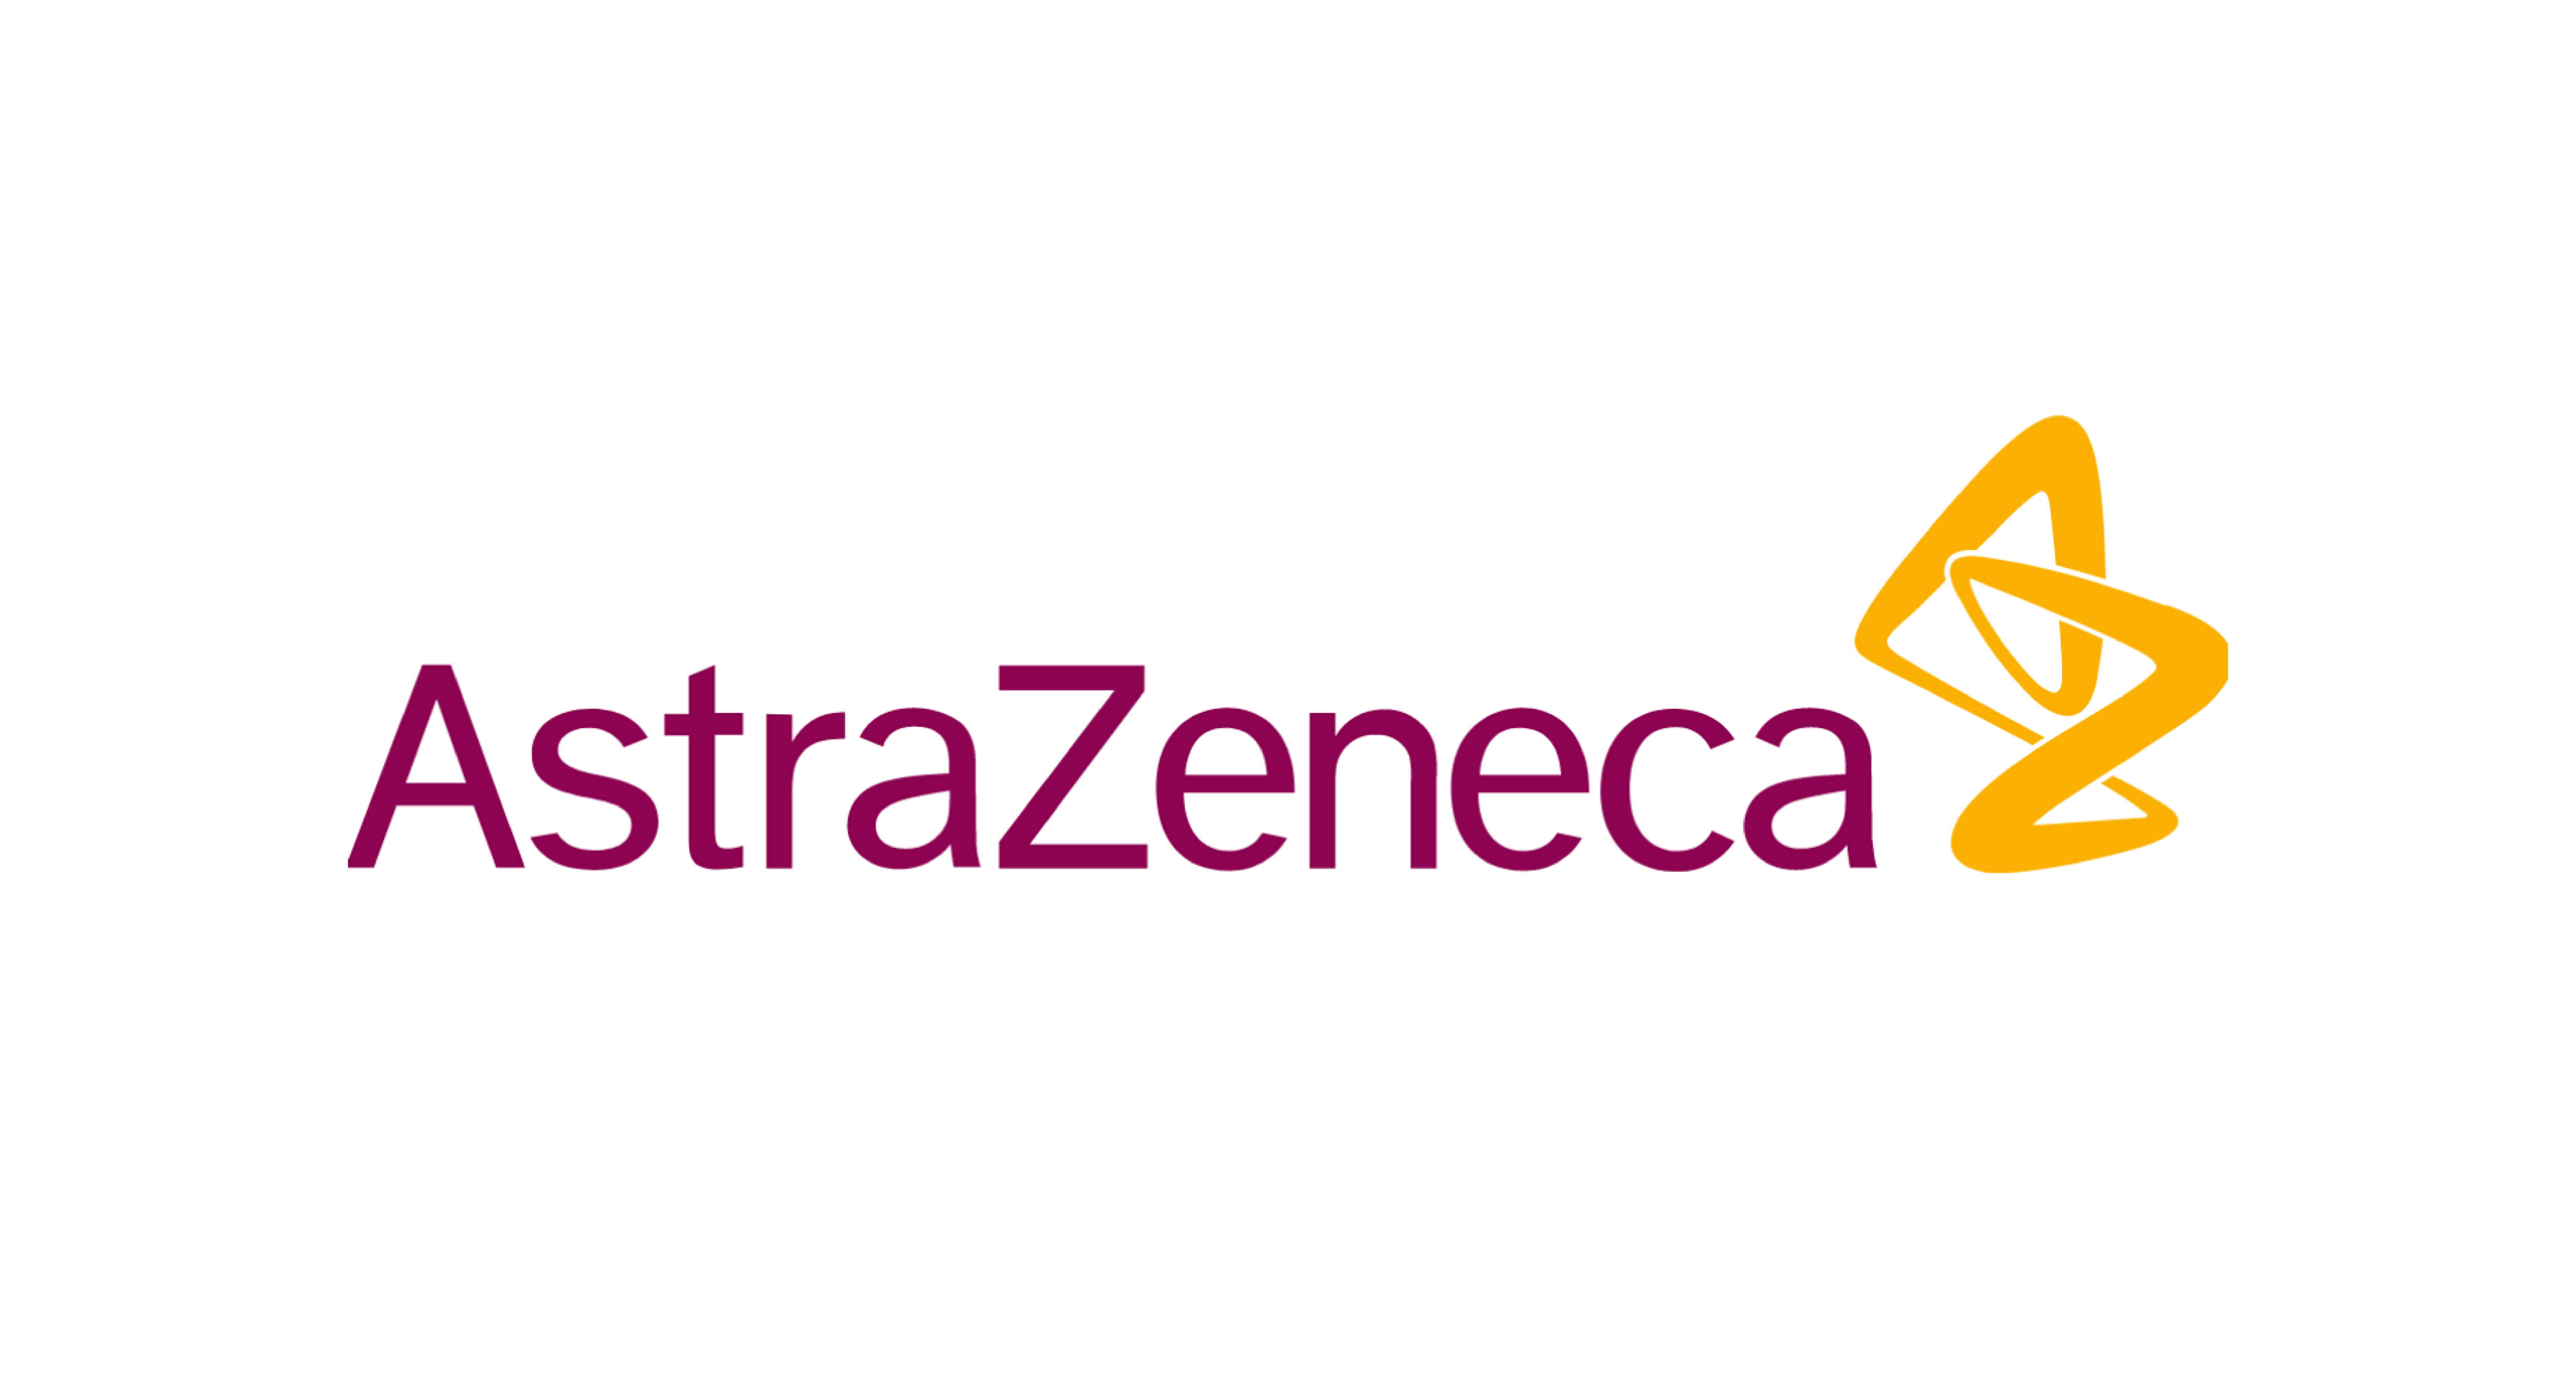 What&#39;s Going On With AstraZeneca Stock Today?